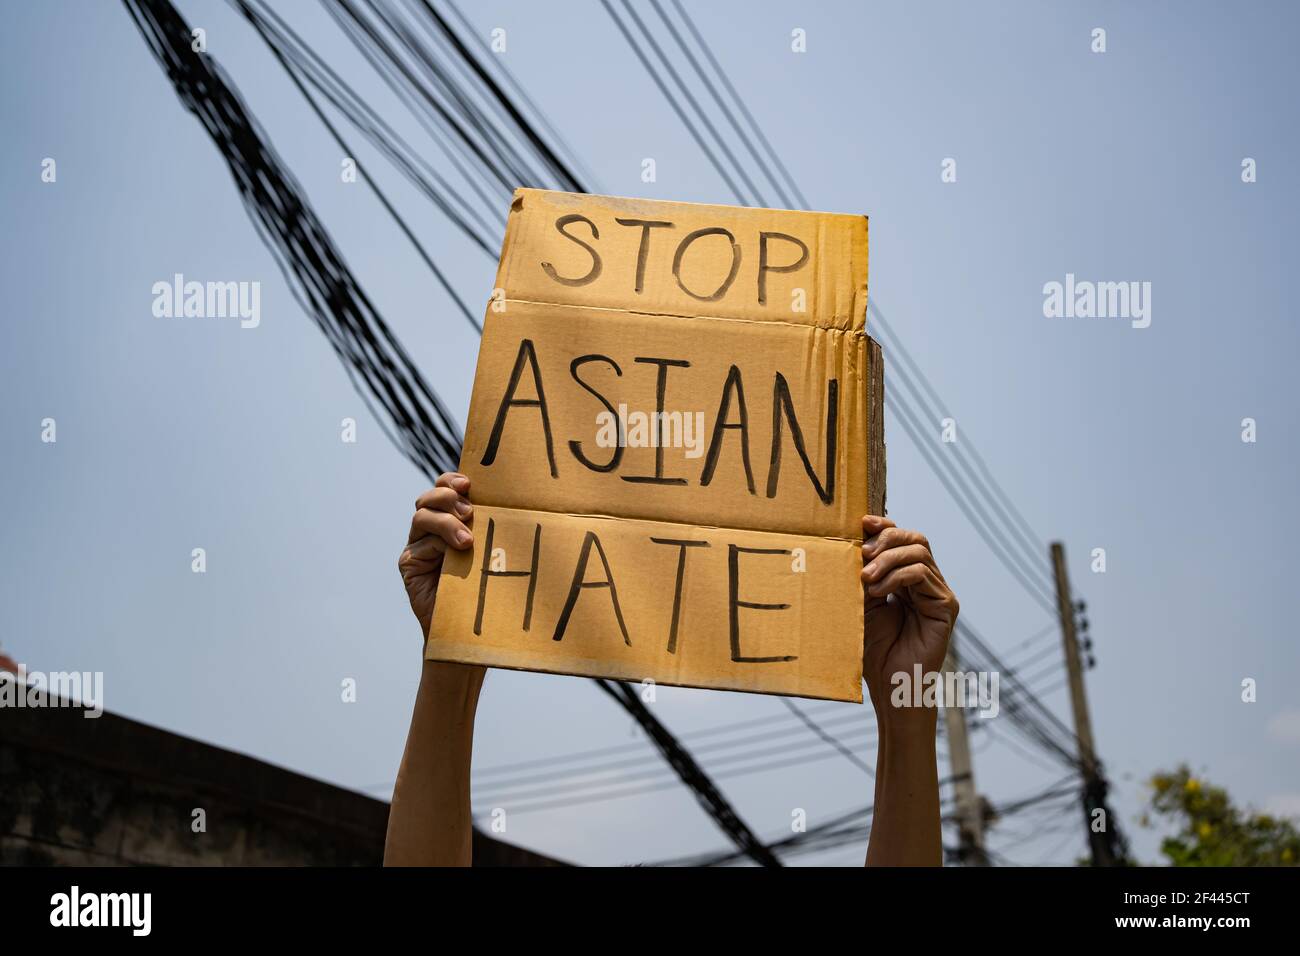 A man holding Stop Asian Hate sign Stock Photo